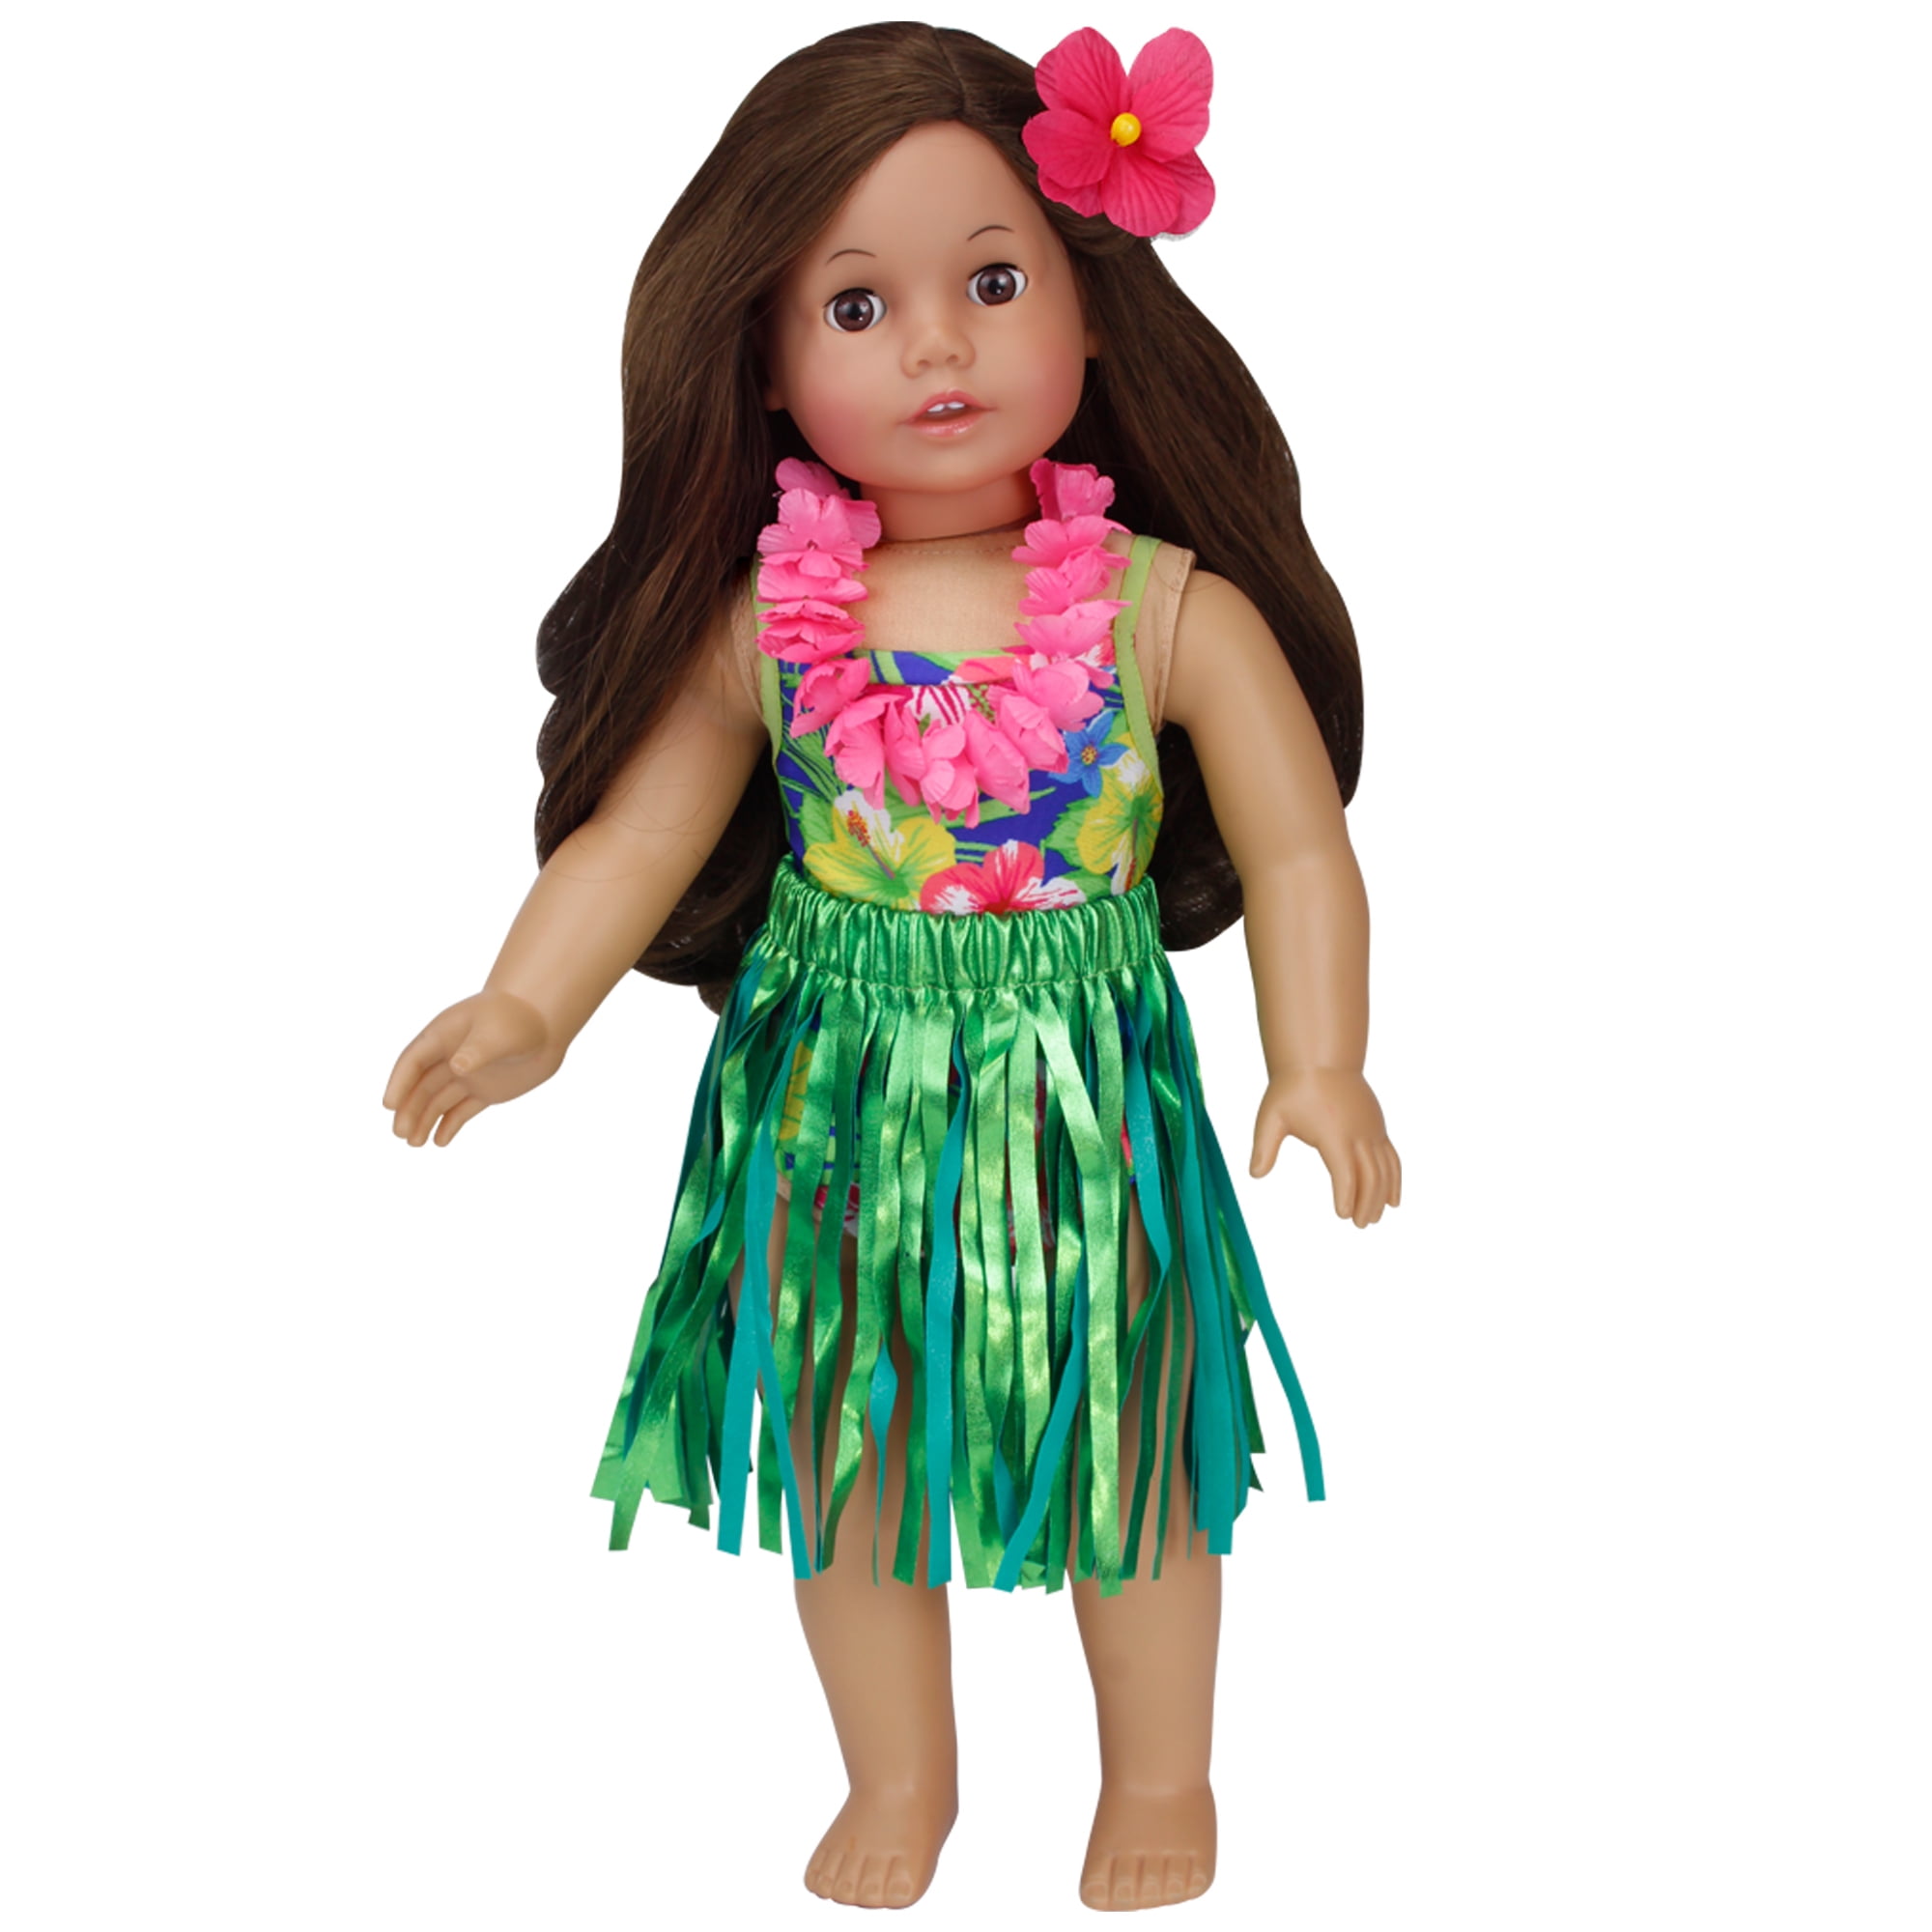 4PC Hawaiian Luau Swimsuit Set For 18 Inch American Girl Doll Clothes 